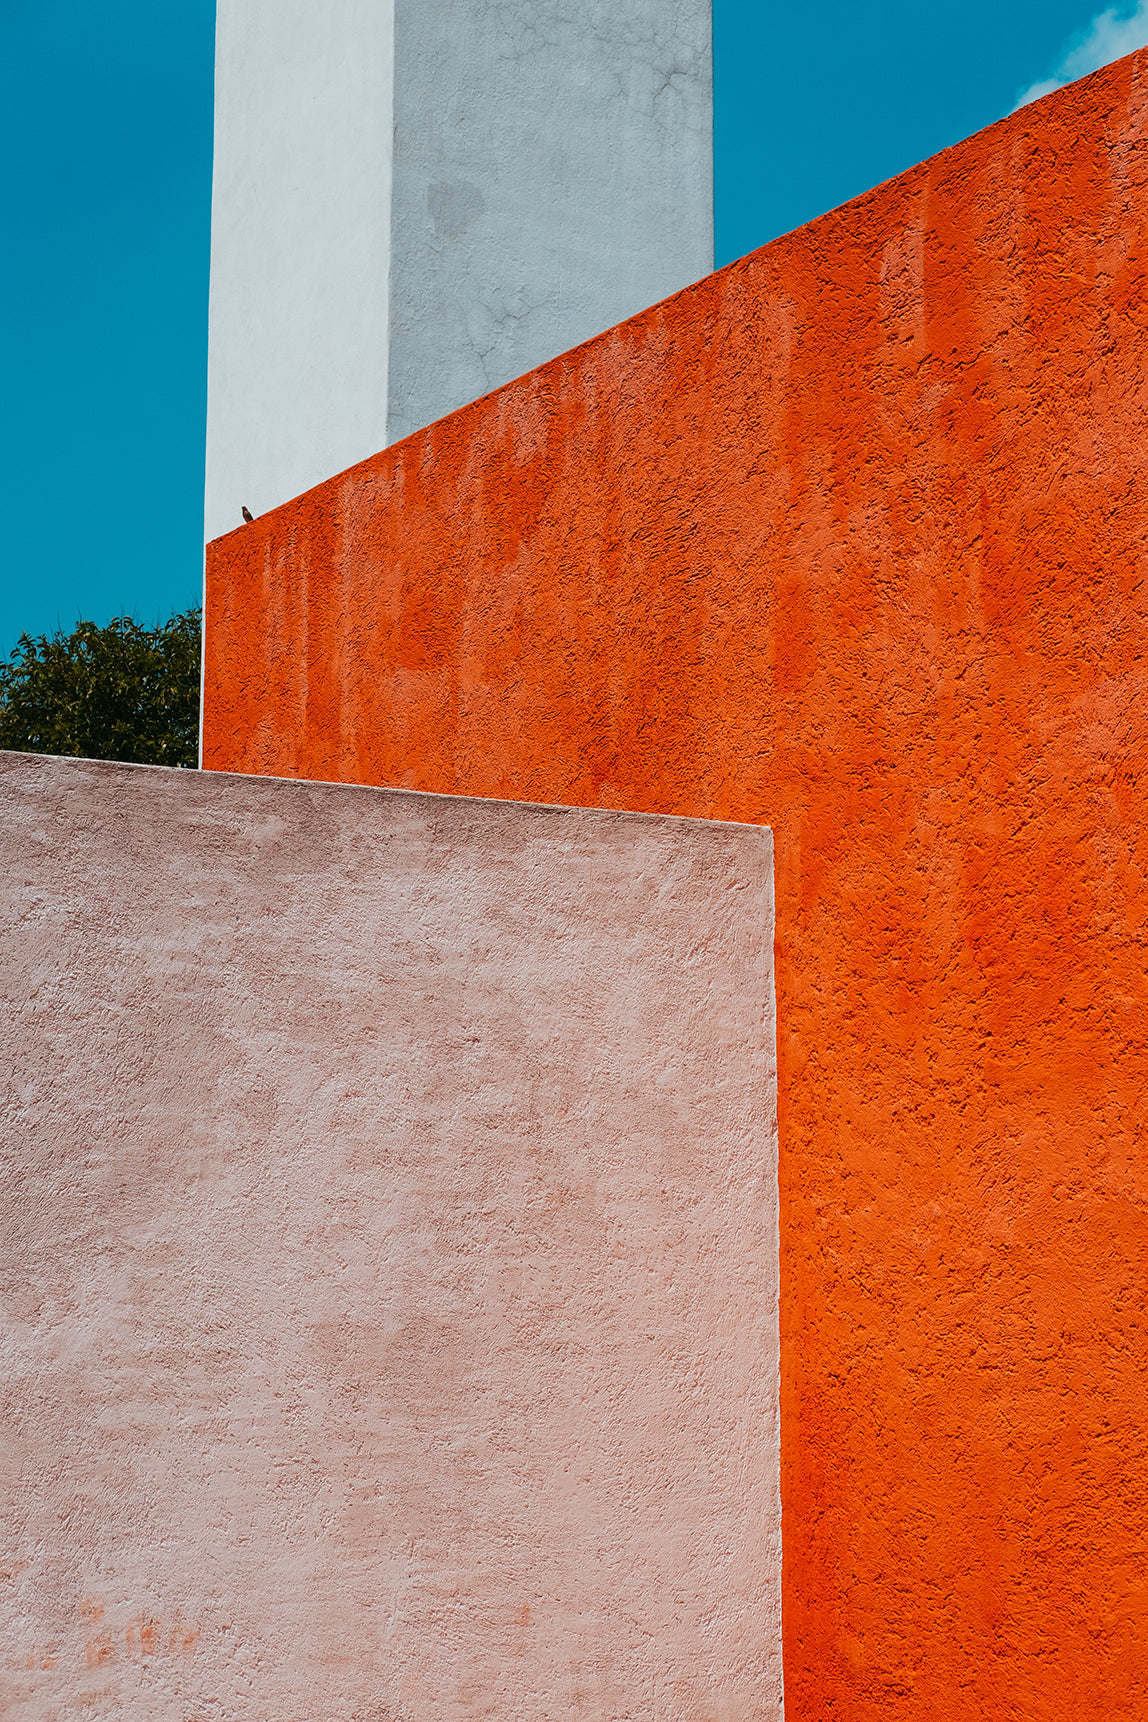 Architectural Geometry in Mexico City with Red, White and Pink Walls Close Up